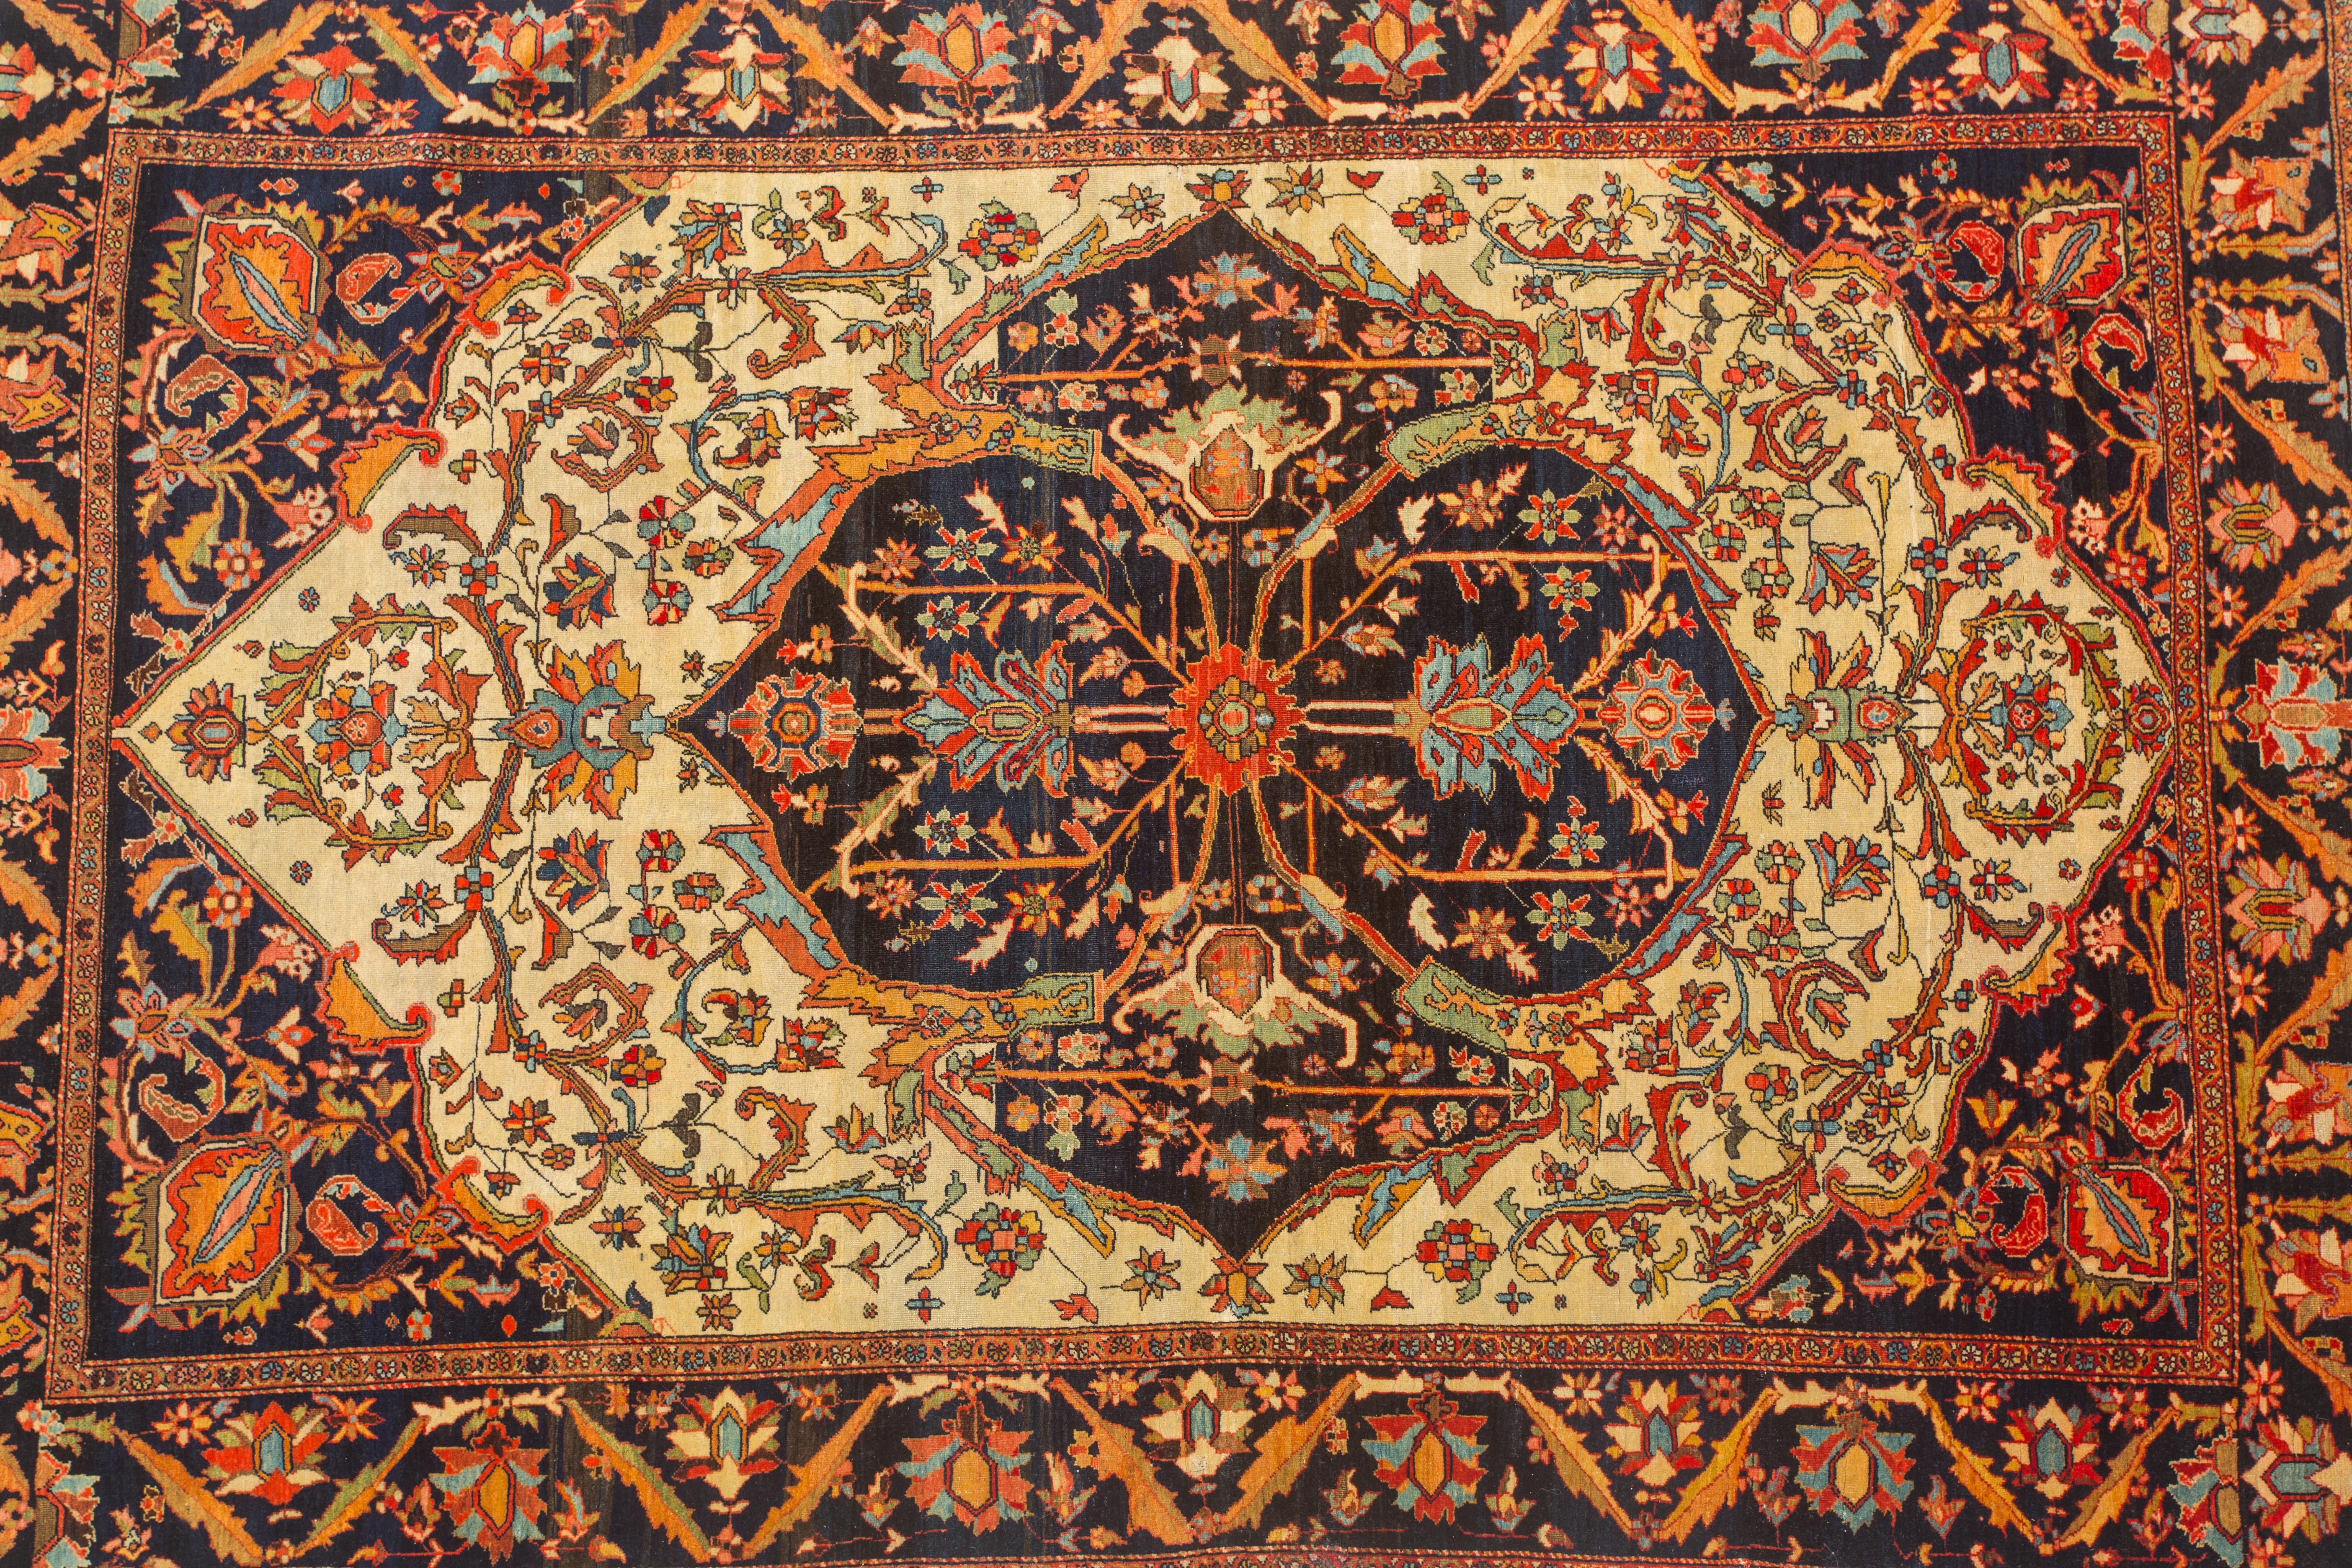 ARISTOCRATIC Ferahan Sarouk 1890
Measures: 6 ft 8 inches x 4 foot 4 inches

Ladies, if you seek a gift for your much loved man, to make him feel like a Prince, consider this little piece of aristocracy. 



Ferahan Sarouk carpets produced